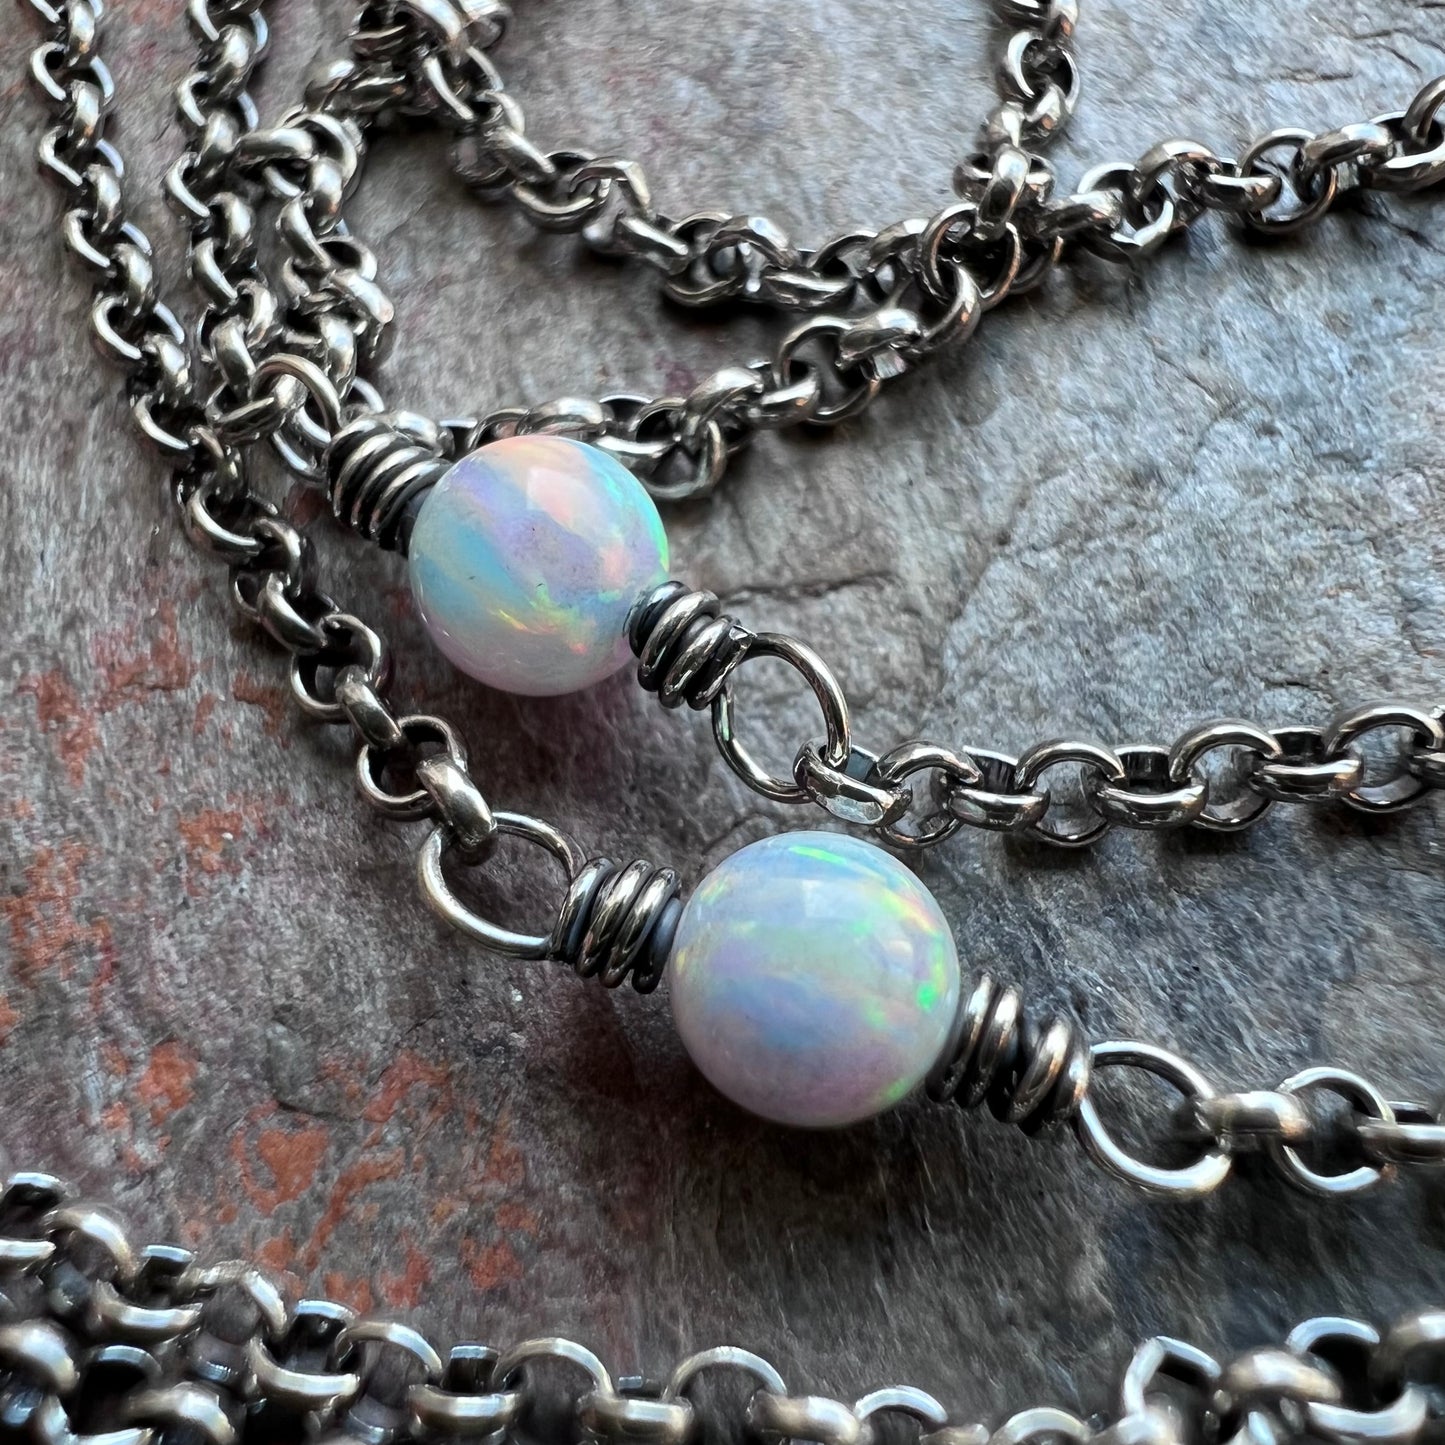 Long Sterling Silver Opal Necklace - Simulated Opal and Sterling Silver Chain Necklace